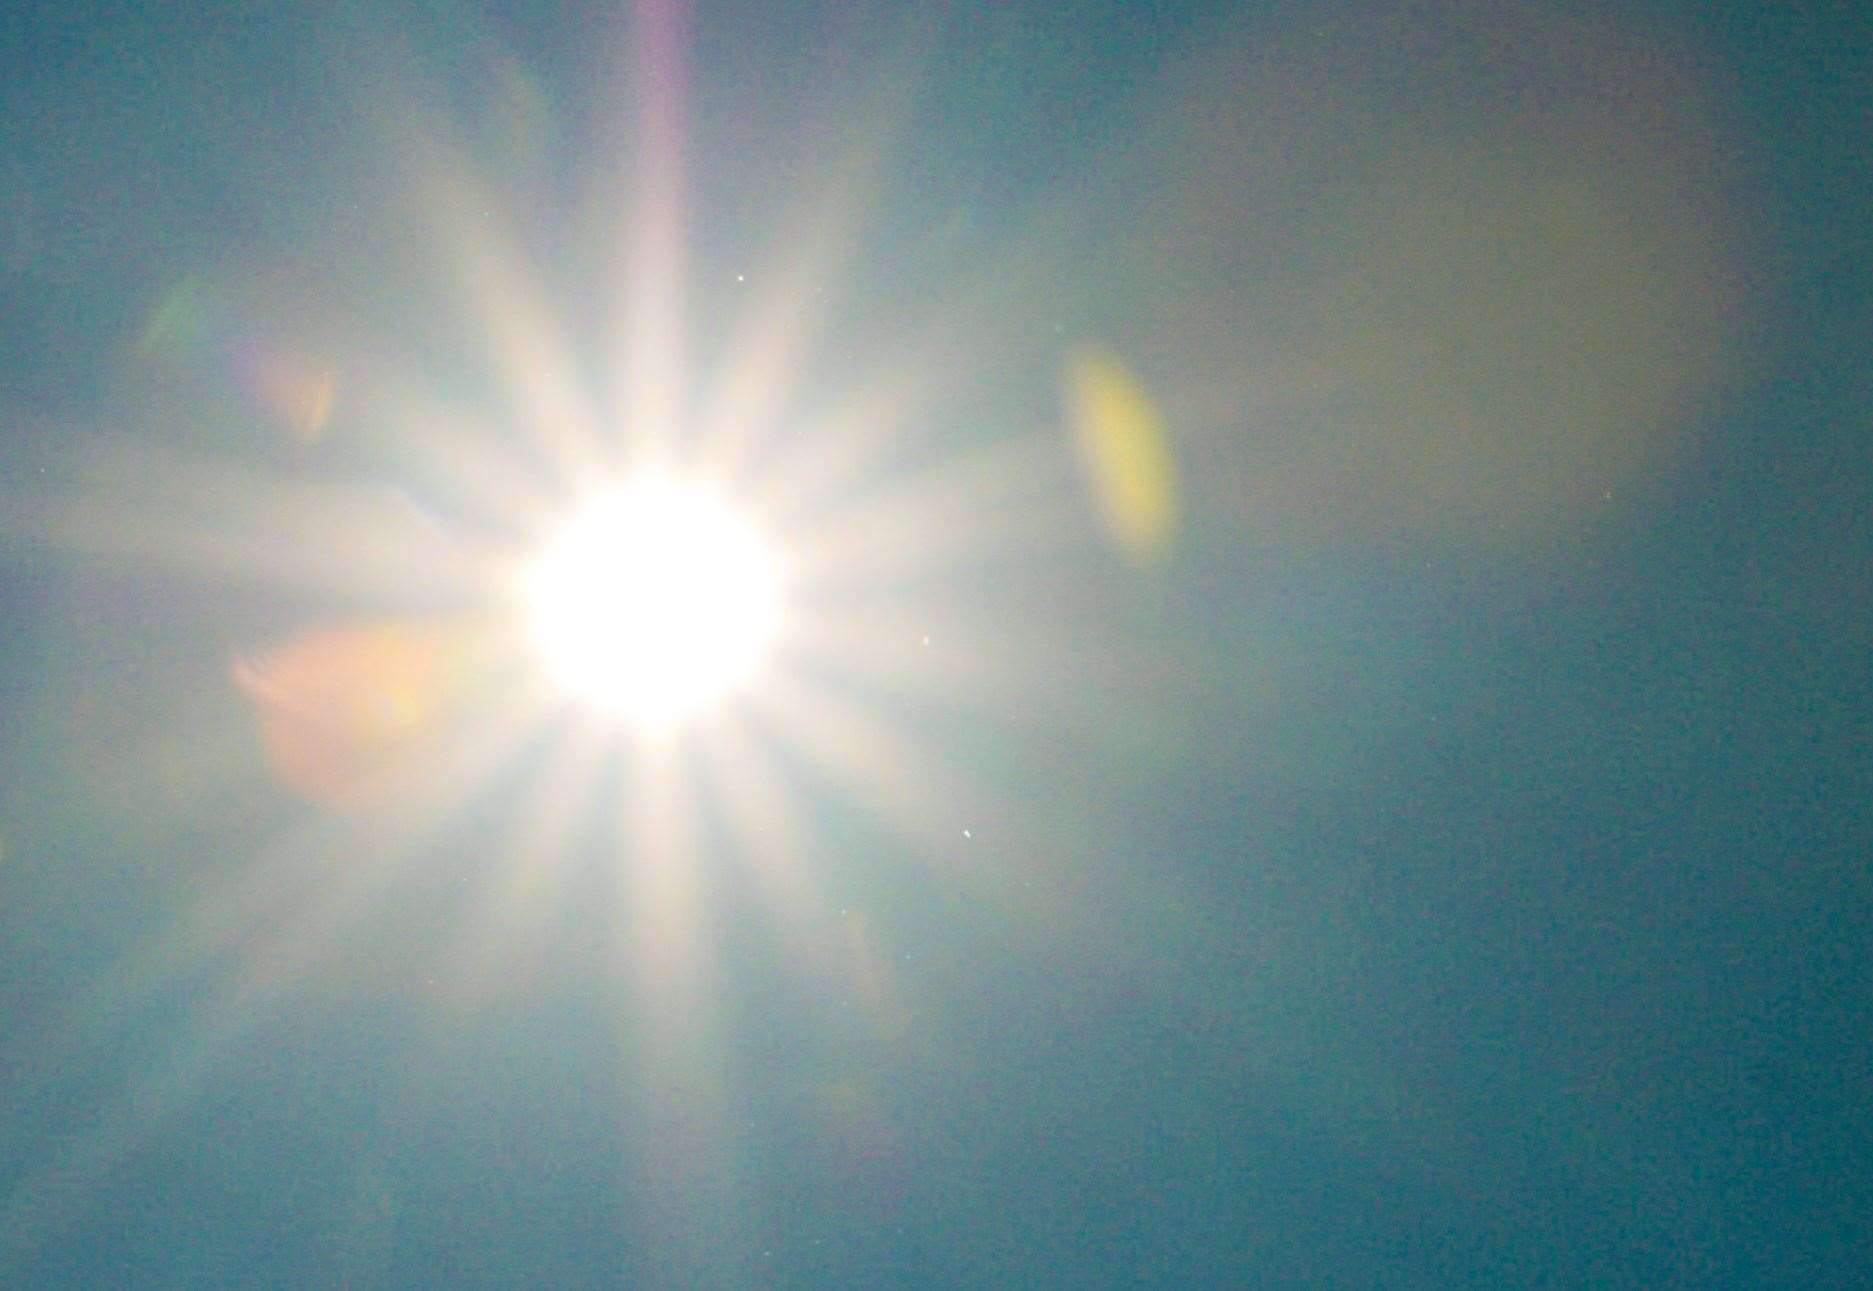 A heat-health alert has been issued as the warm weather continues into next week